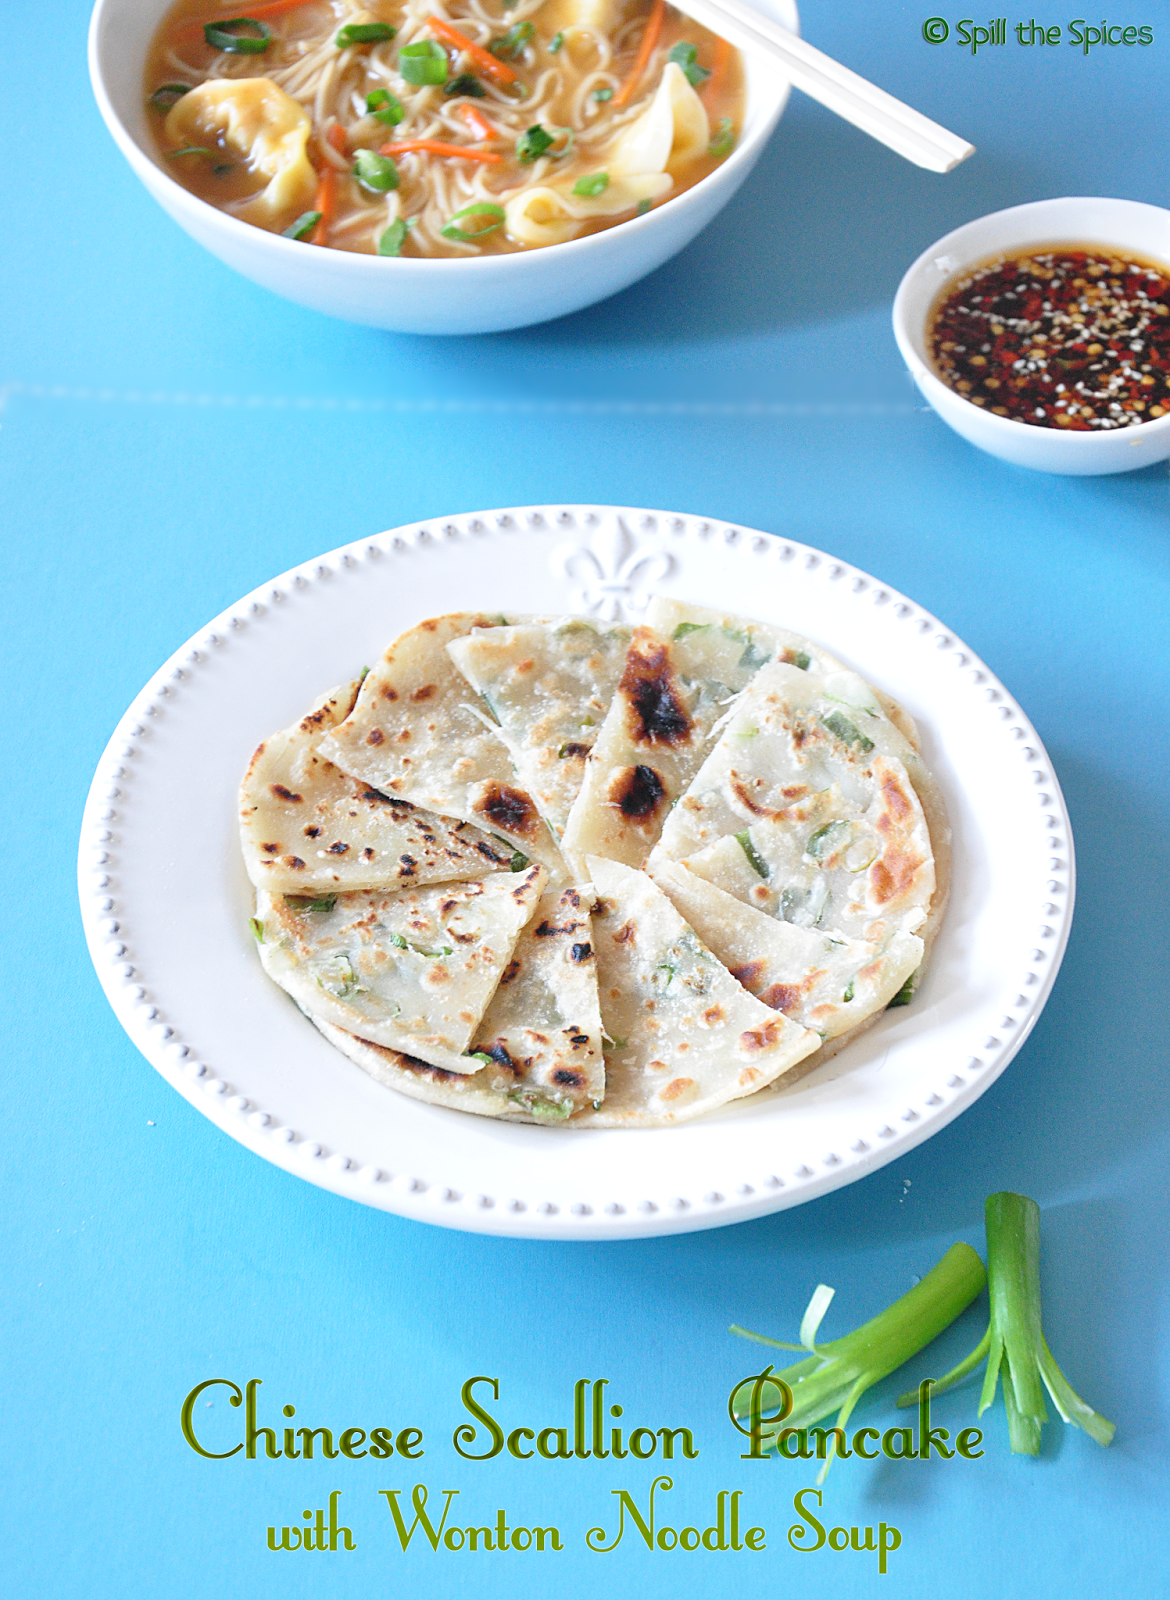 Chinese Scallion Pancakes | Spill the Spices